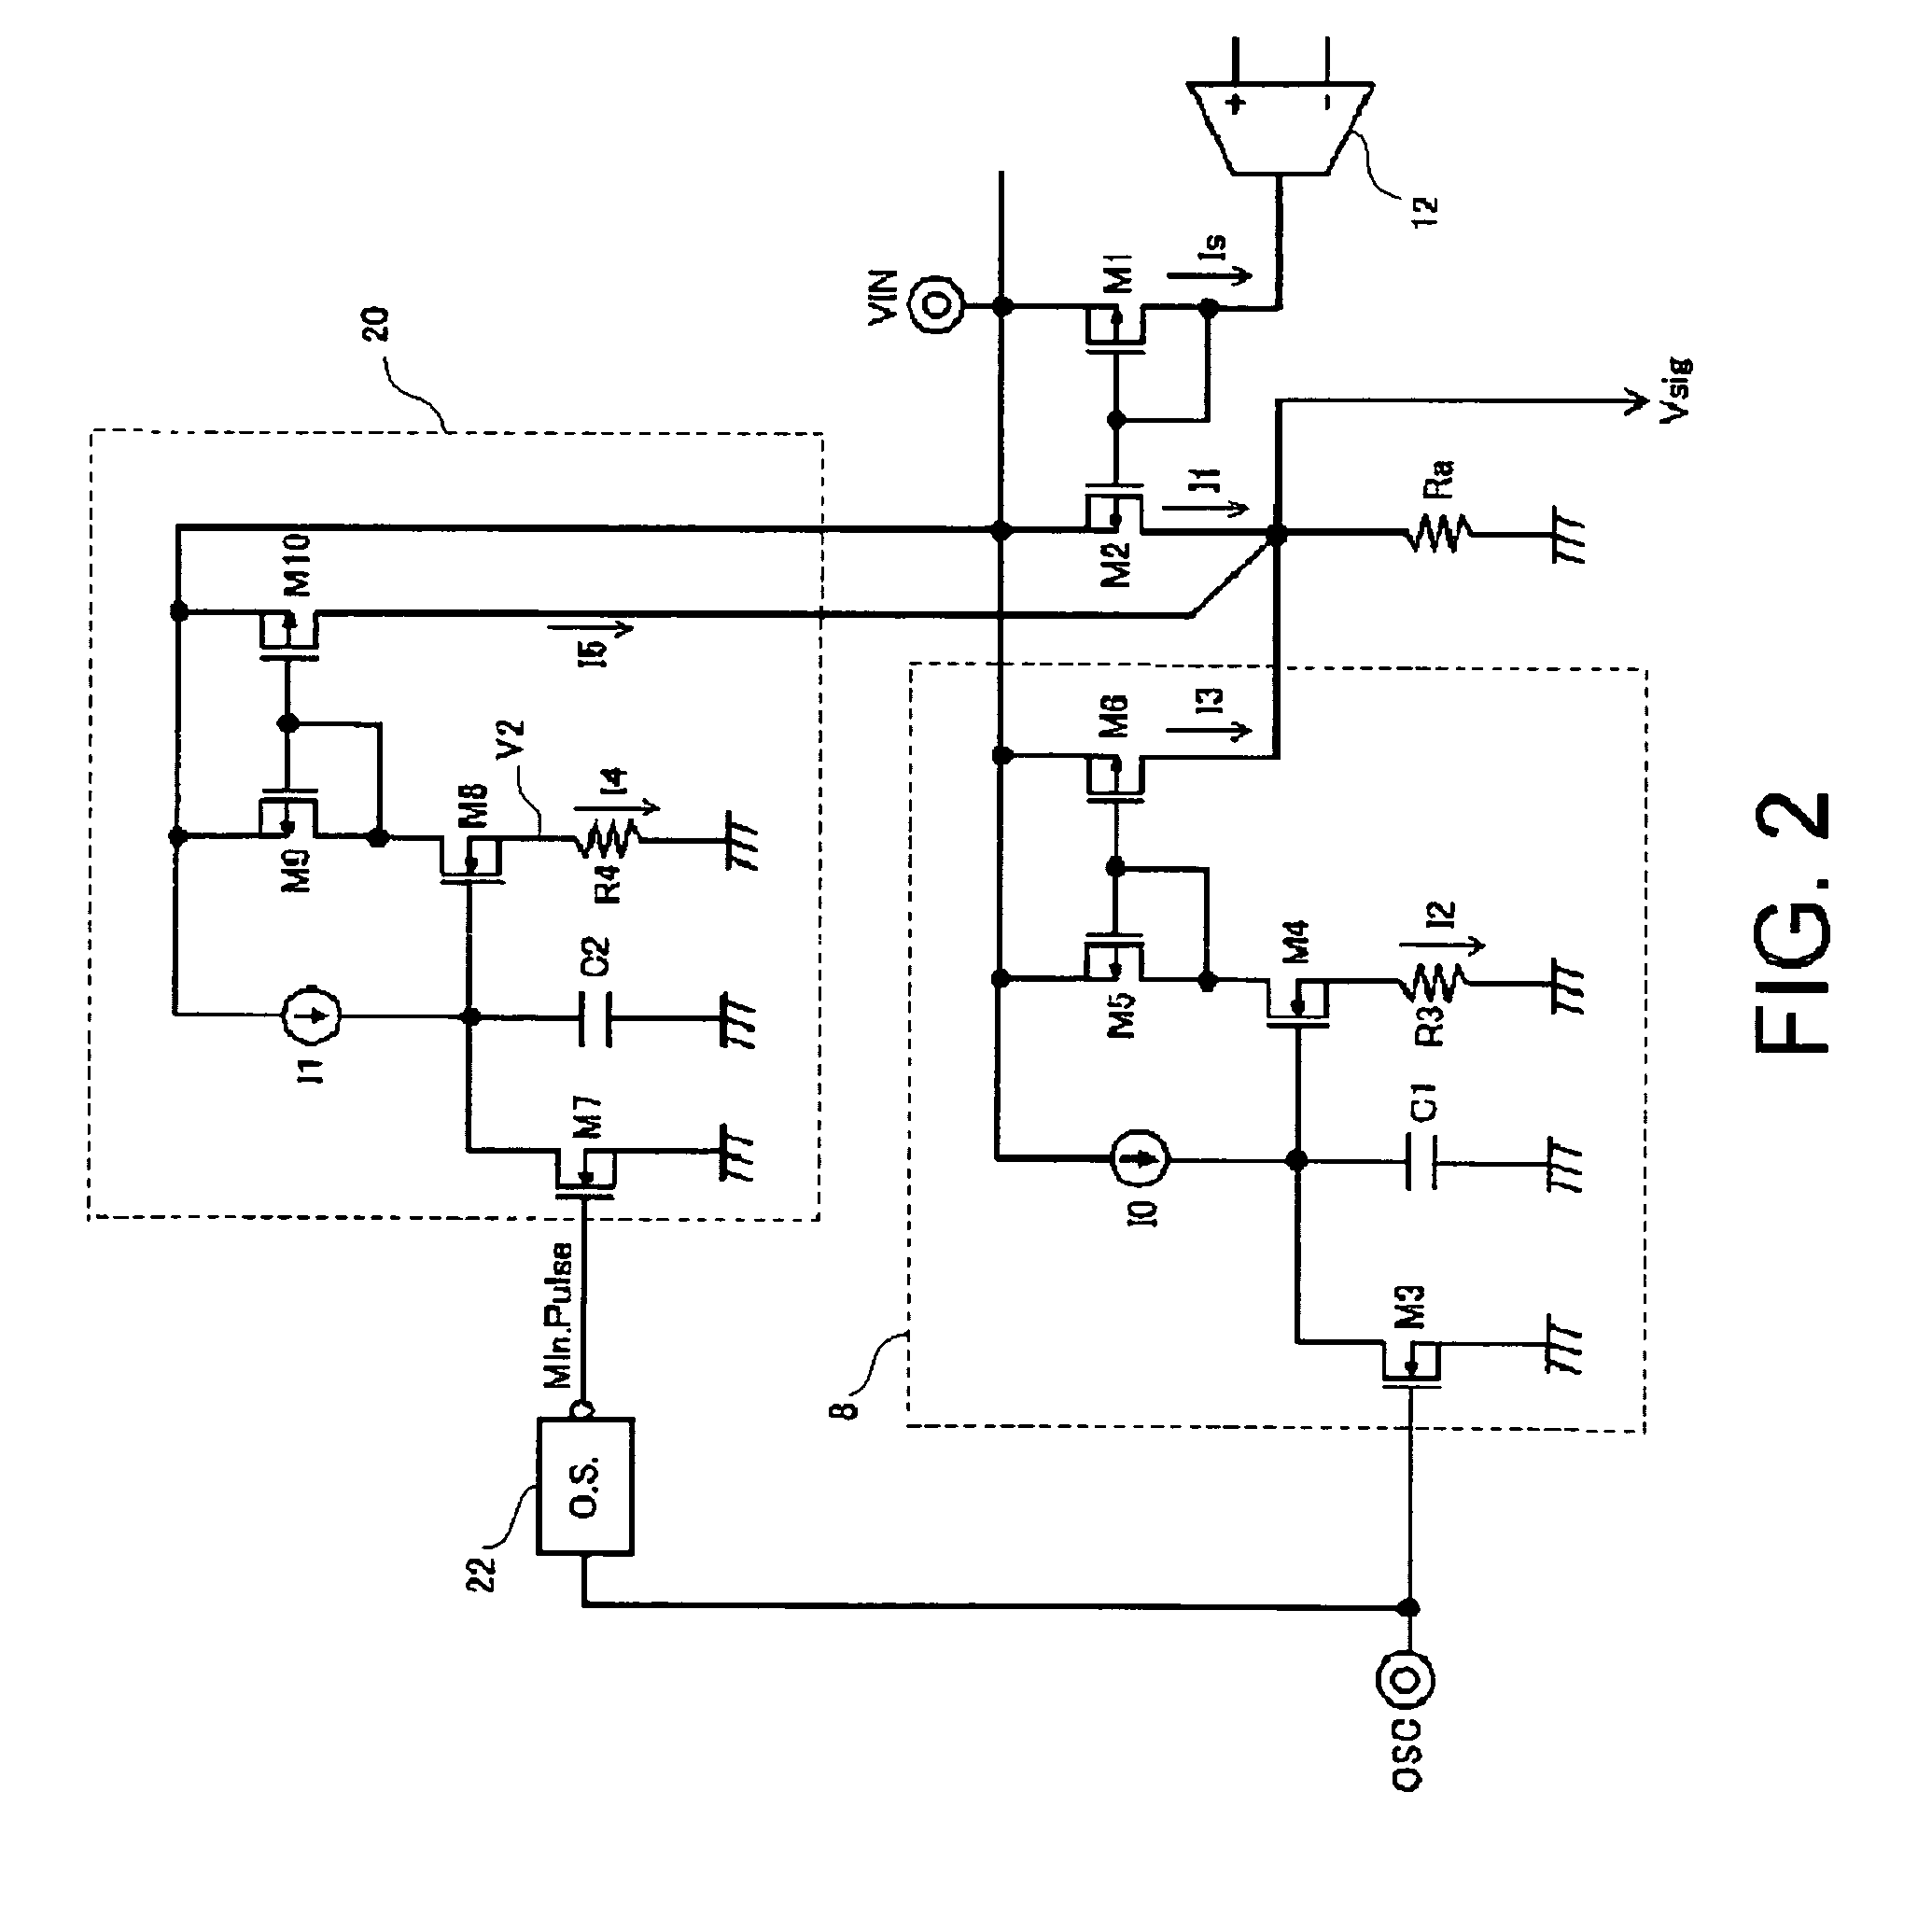 Switching power supply with slope compensation circuit and added slope circuit